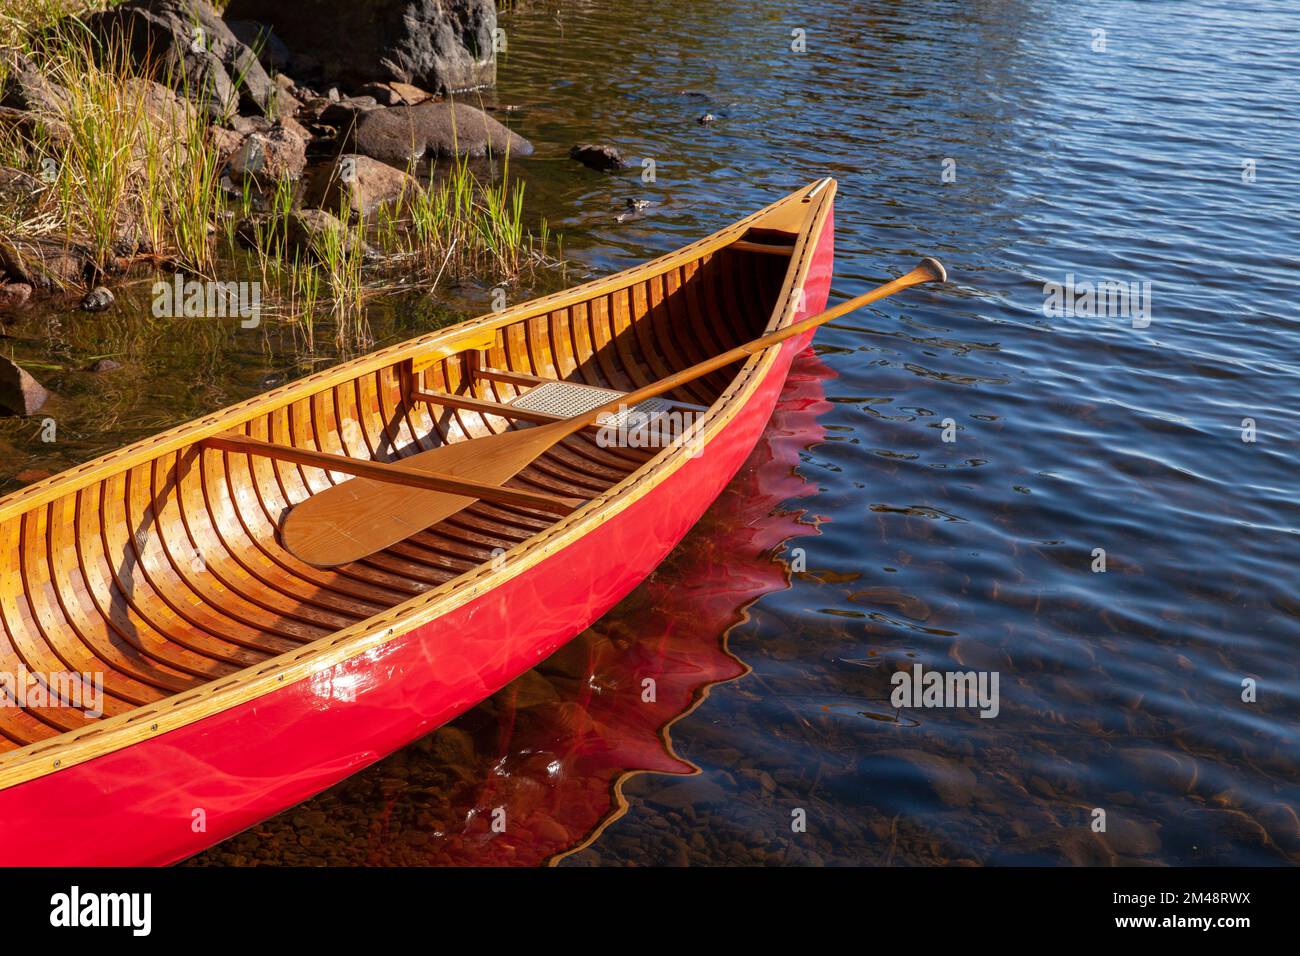 Red wooden canoe in the water by the shore of a northern Minnesota lake Stock Photo